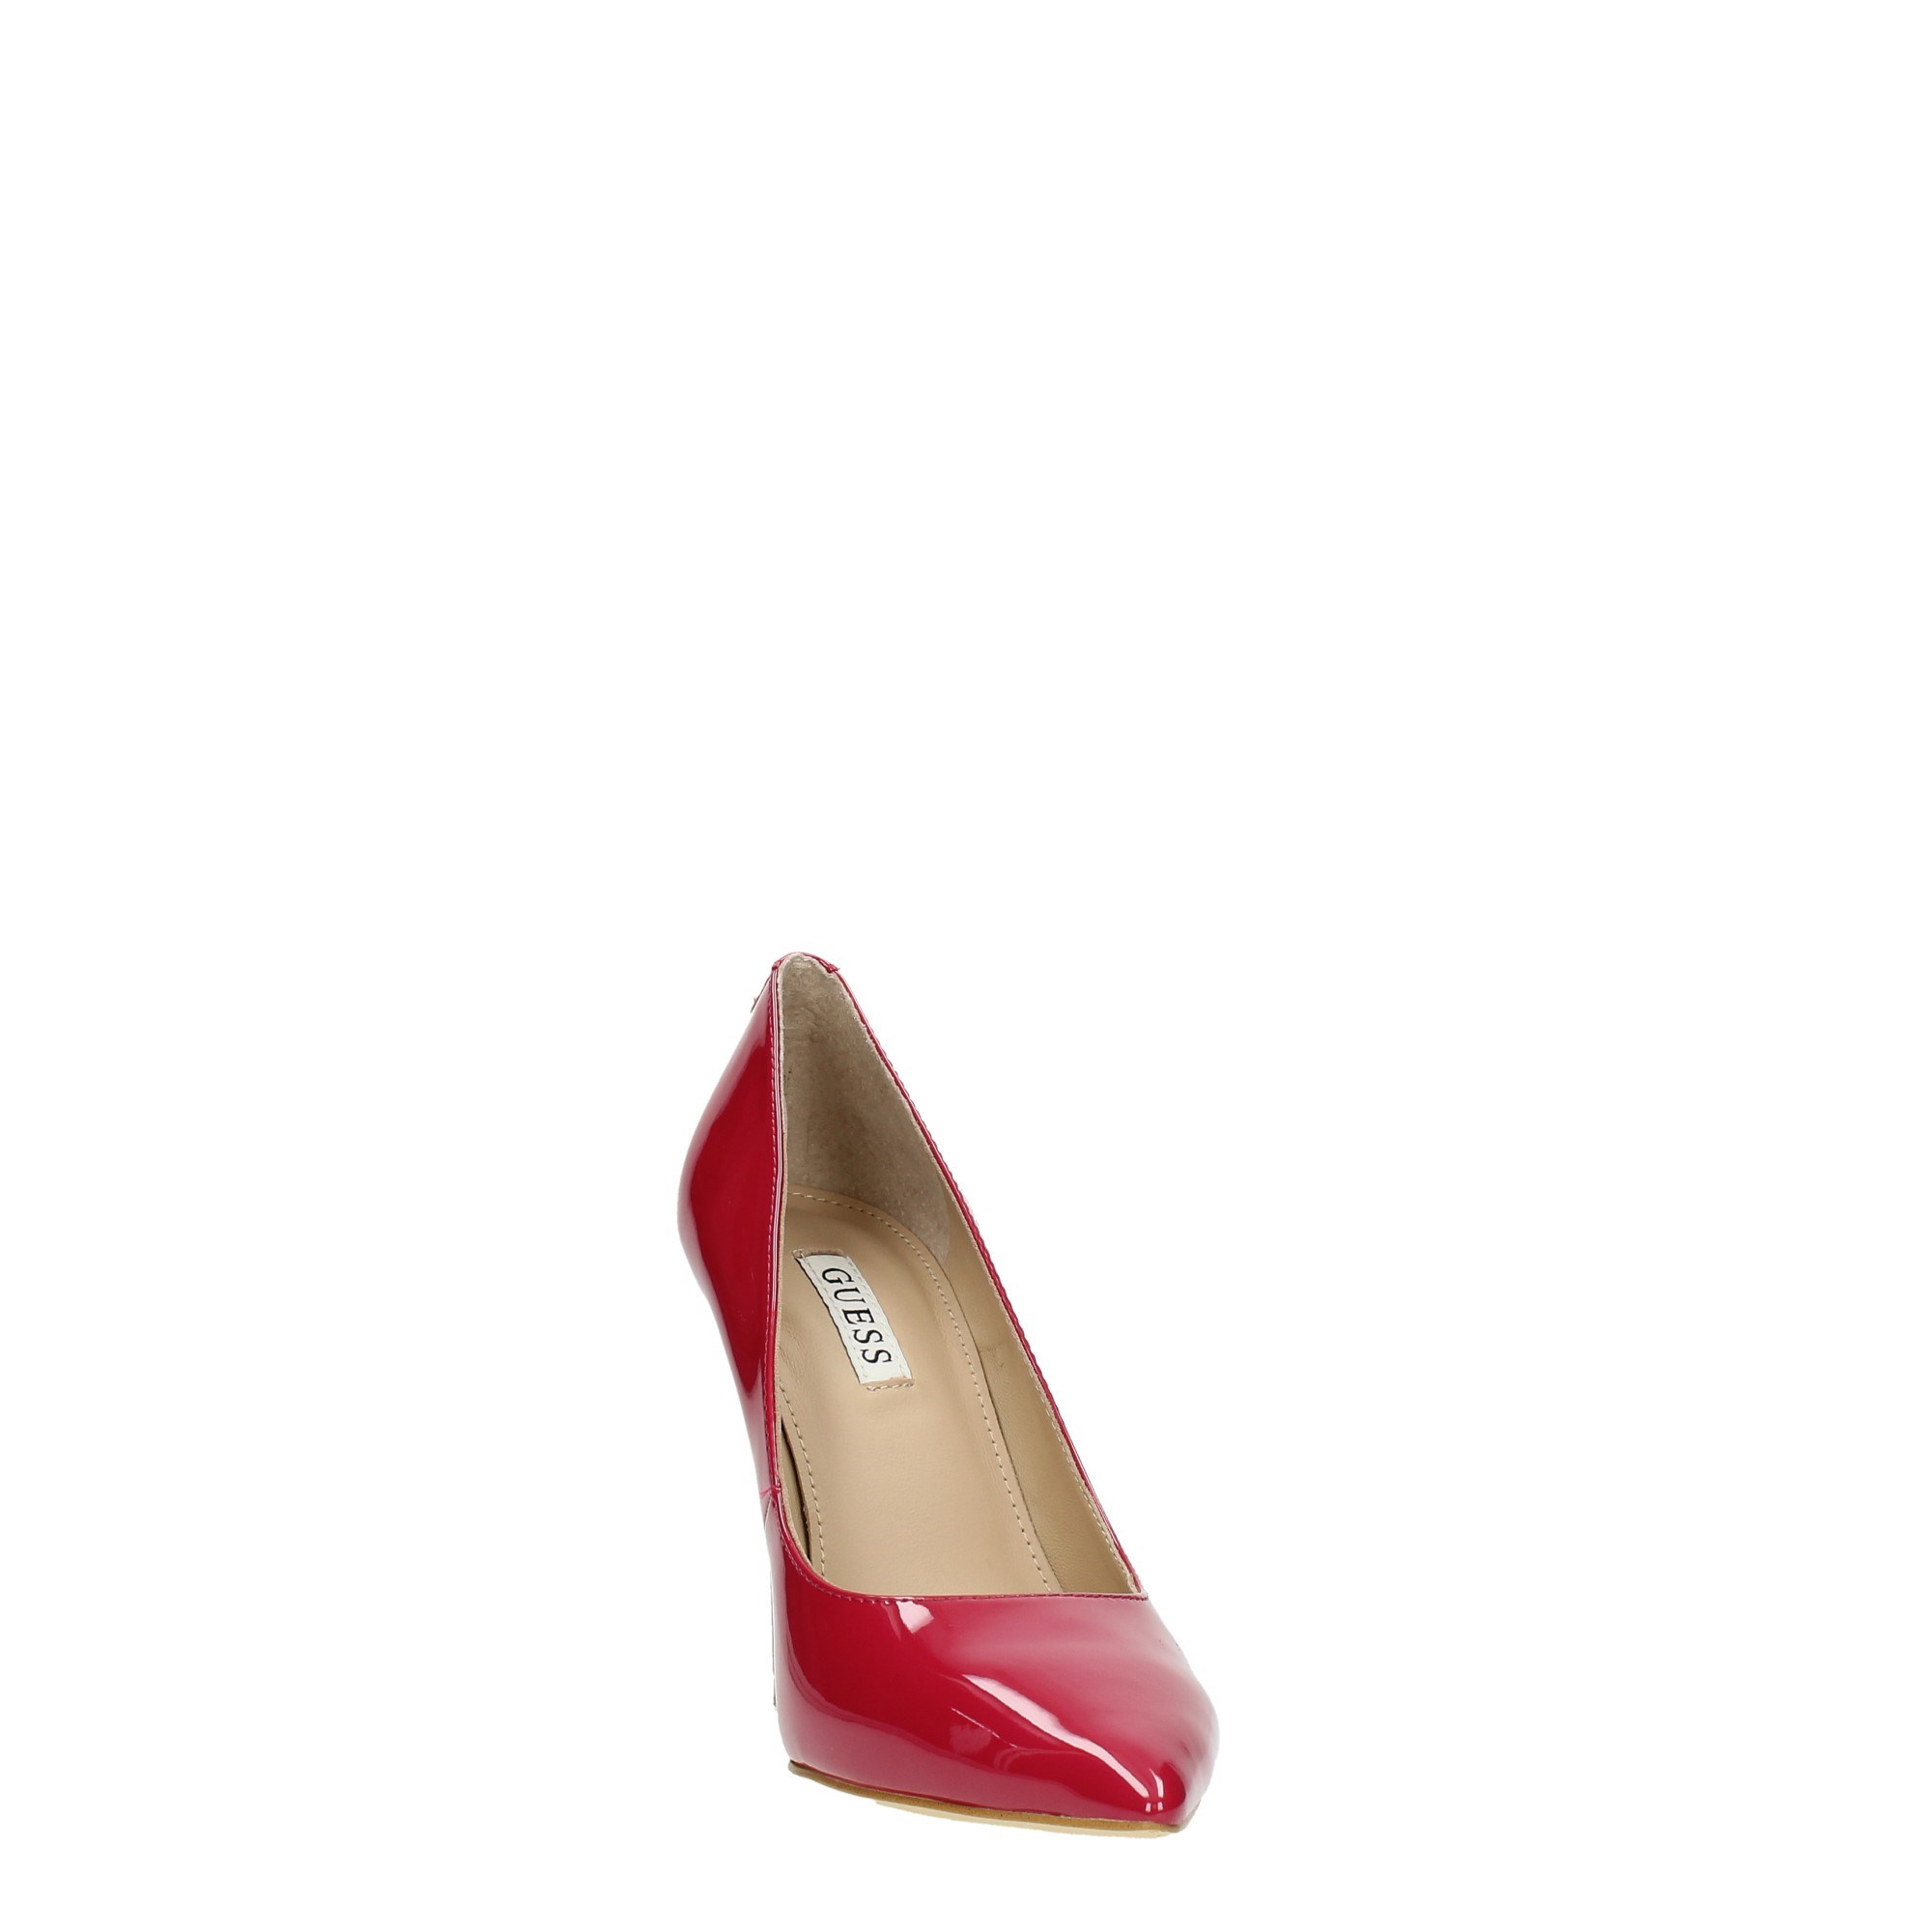 Guess Shoes Women Cleavage And Heeled Shoes Red FL7G10